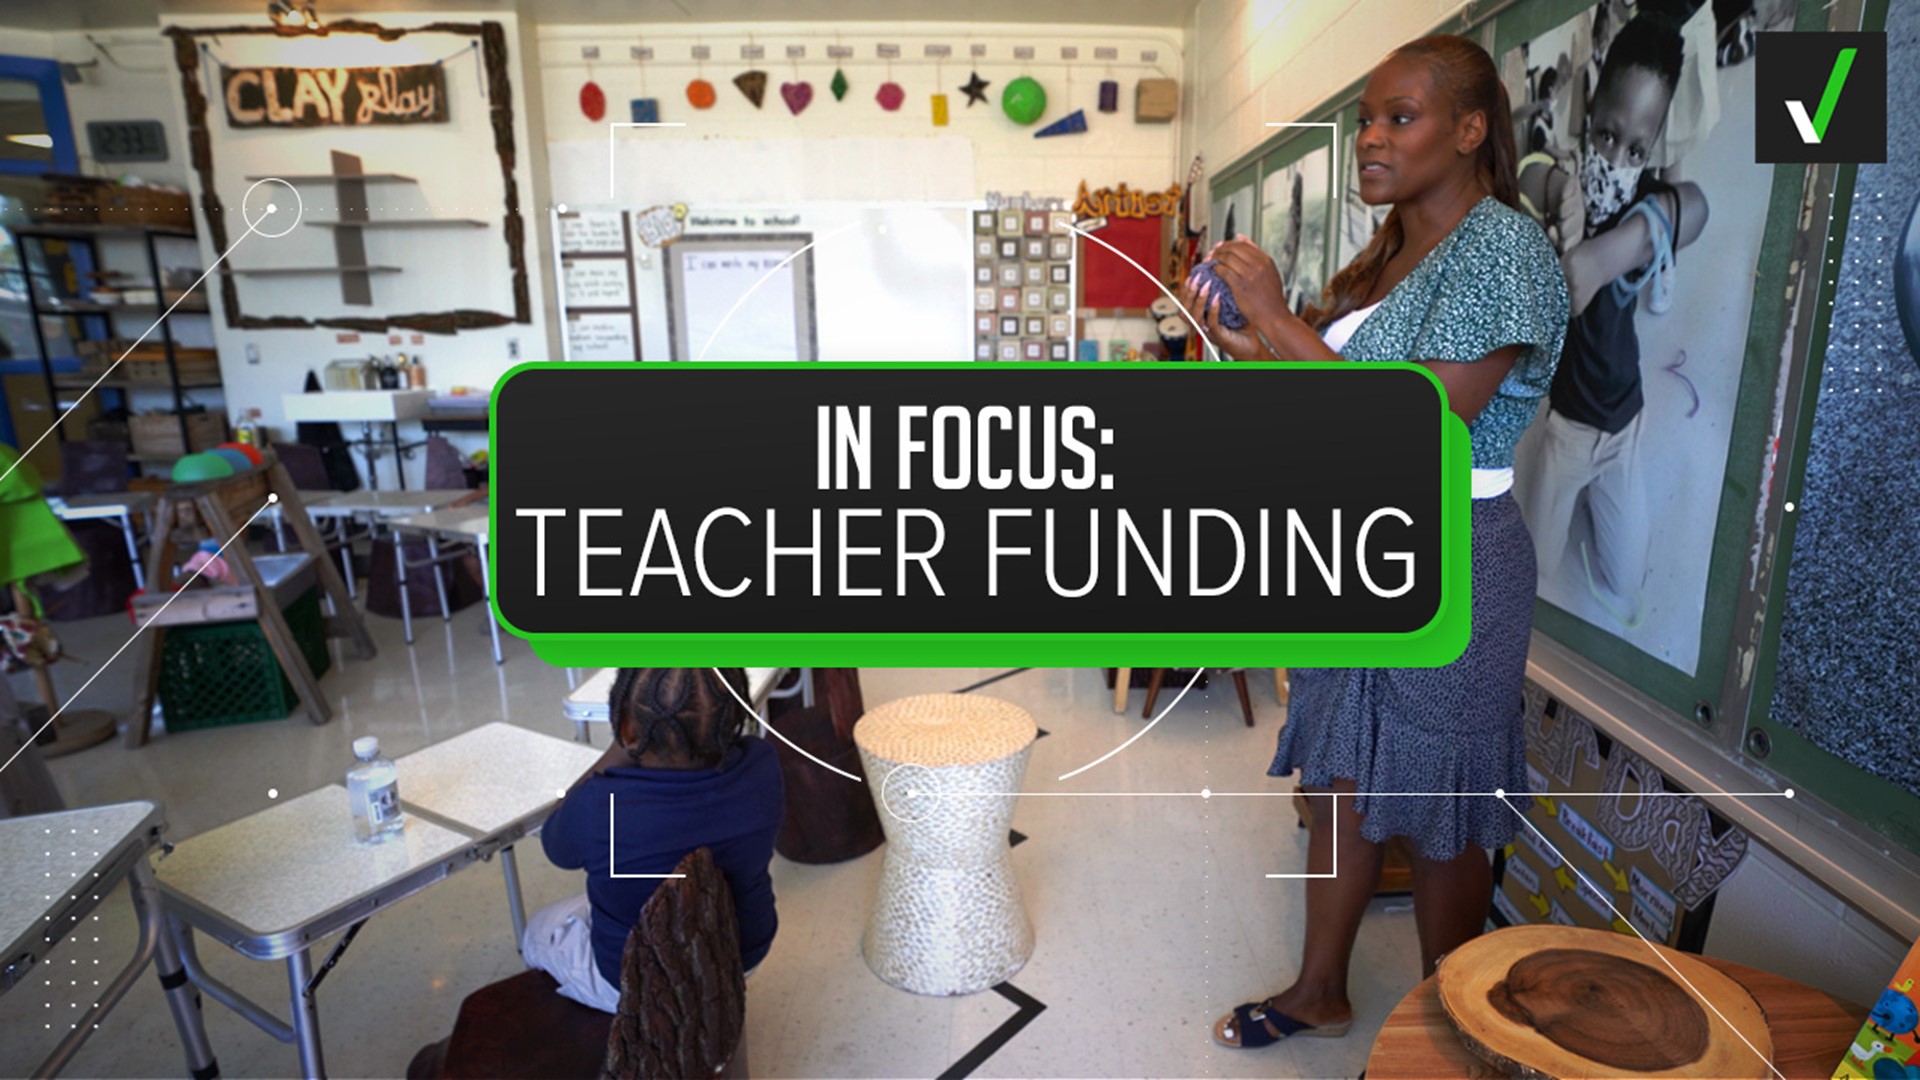 “I've never known a teacher who didn't spend money. It absolutely is the norm. And sometimes, it is the expectation,” D.C. teacher Dominique Foster told VERIFY.